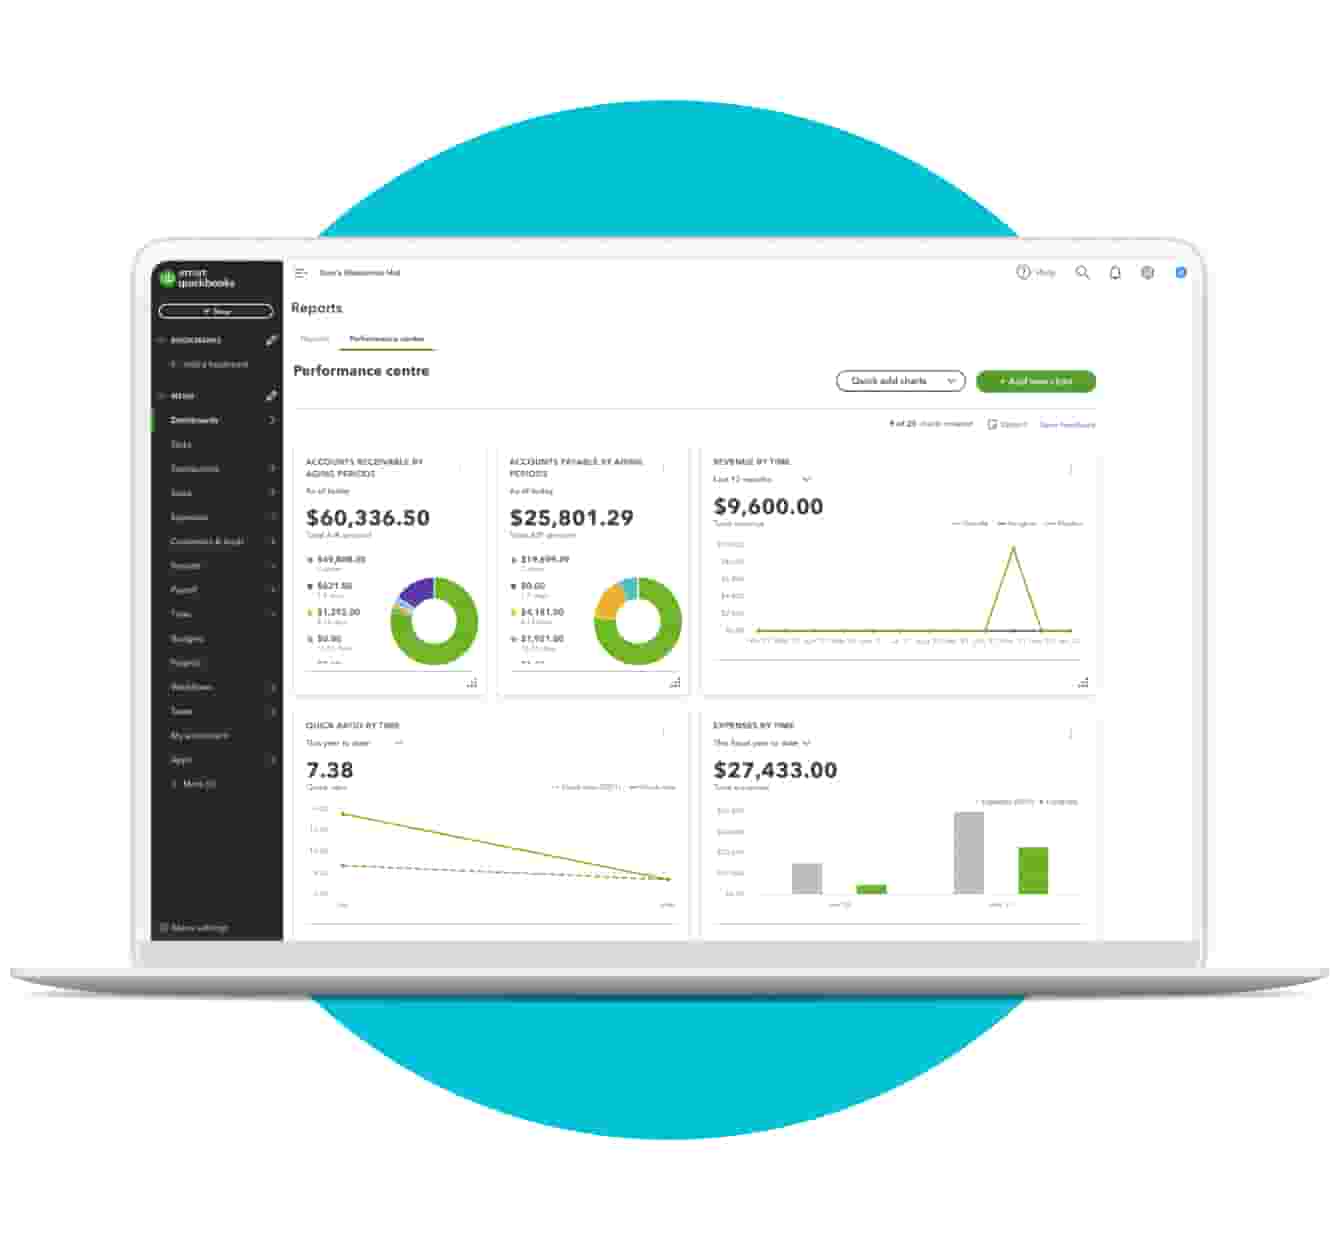 The QuickBooks Advanced Report dashboard showing Performance Centre with Accounts Receivable, Accounts Payable, Revenue by Time, Quick ratio by time, and expenses.